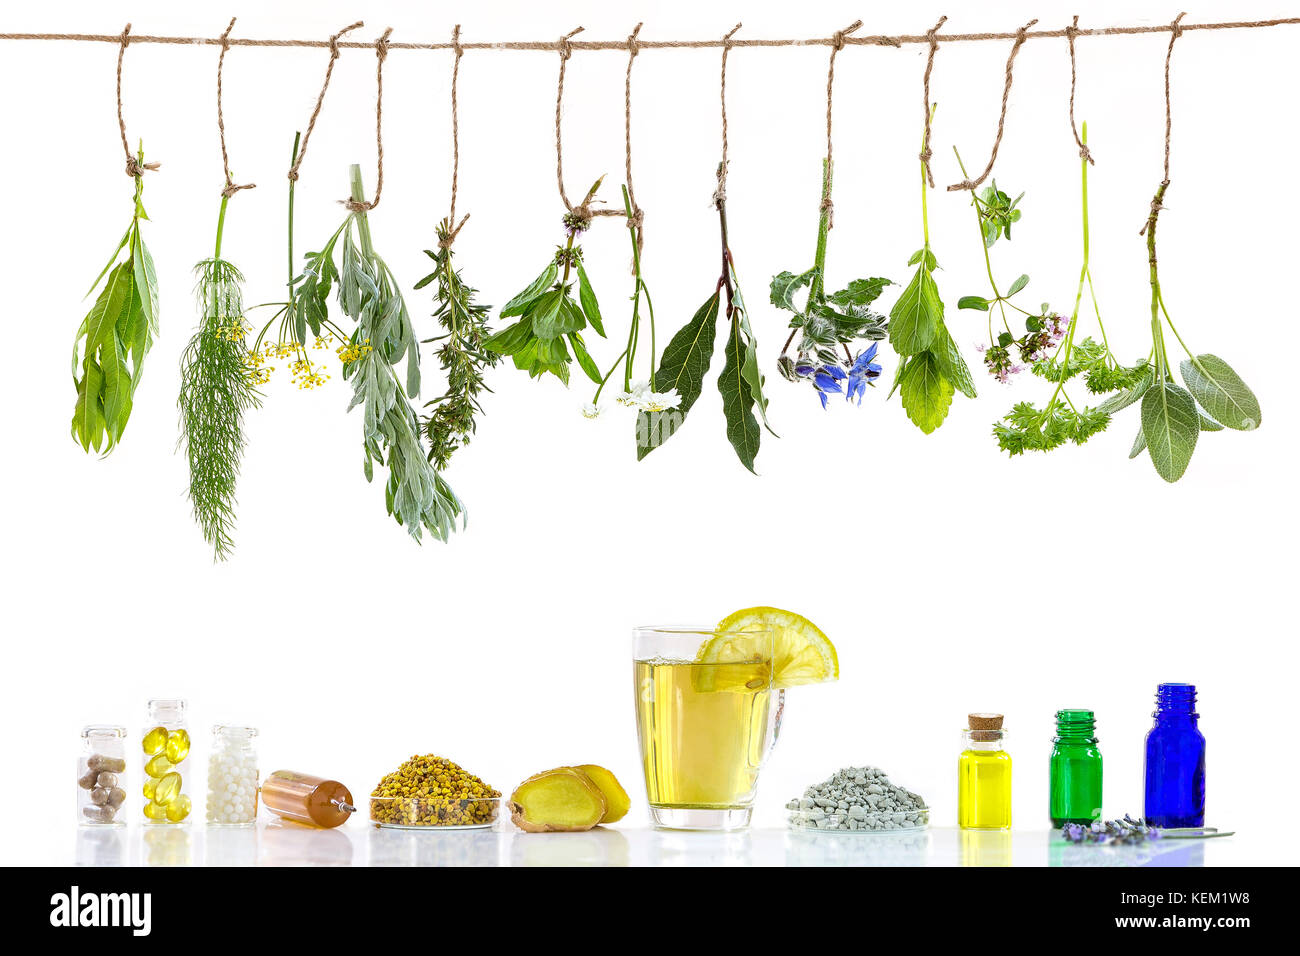 Various ingrdient s . Preparing medicinal plants for phytotherapyand healthbeauty alternative medicine promotion on old wall Stock Photo